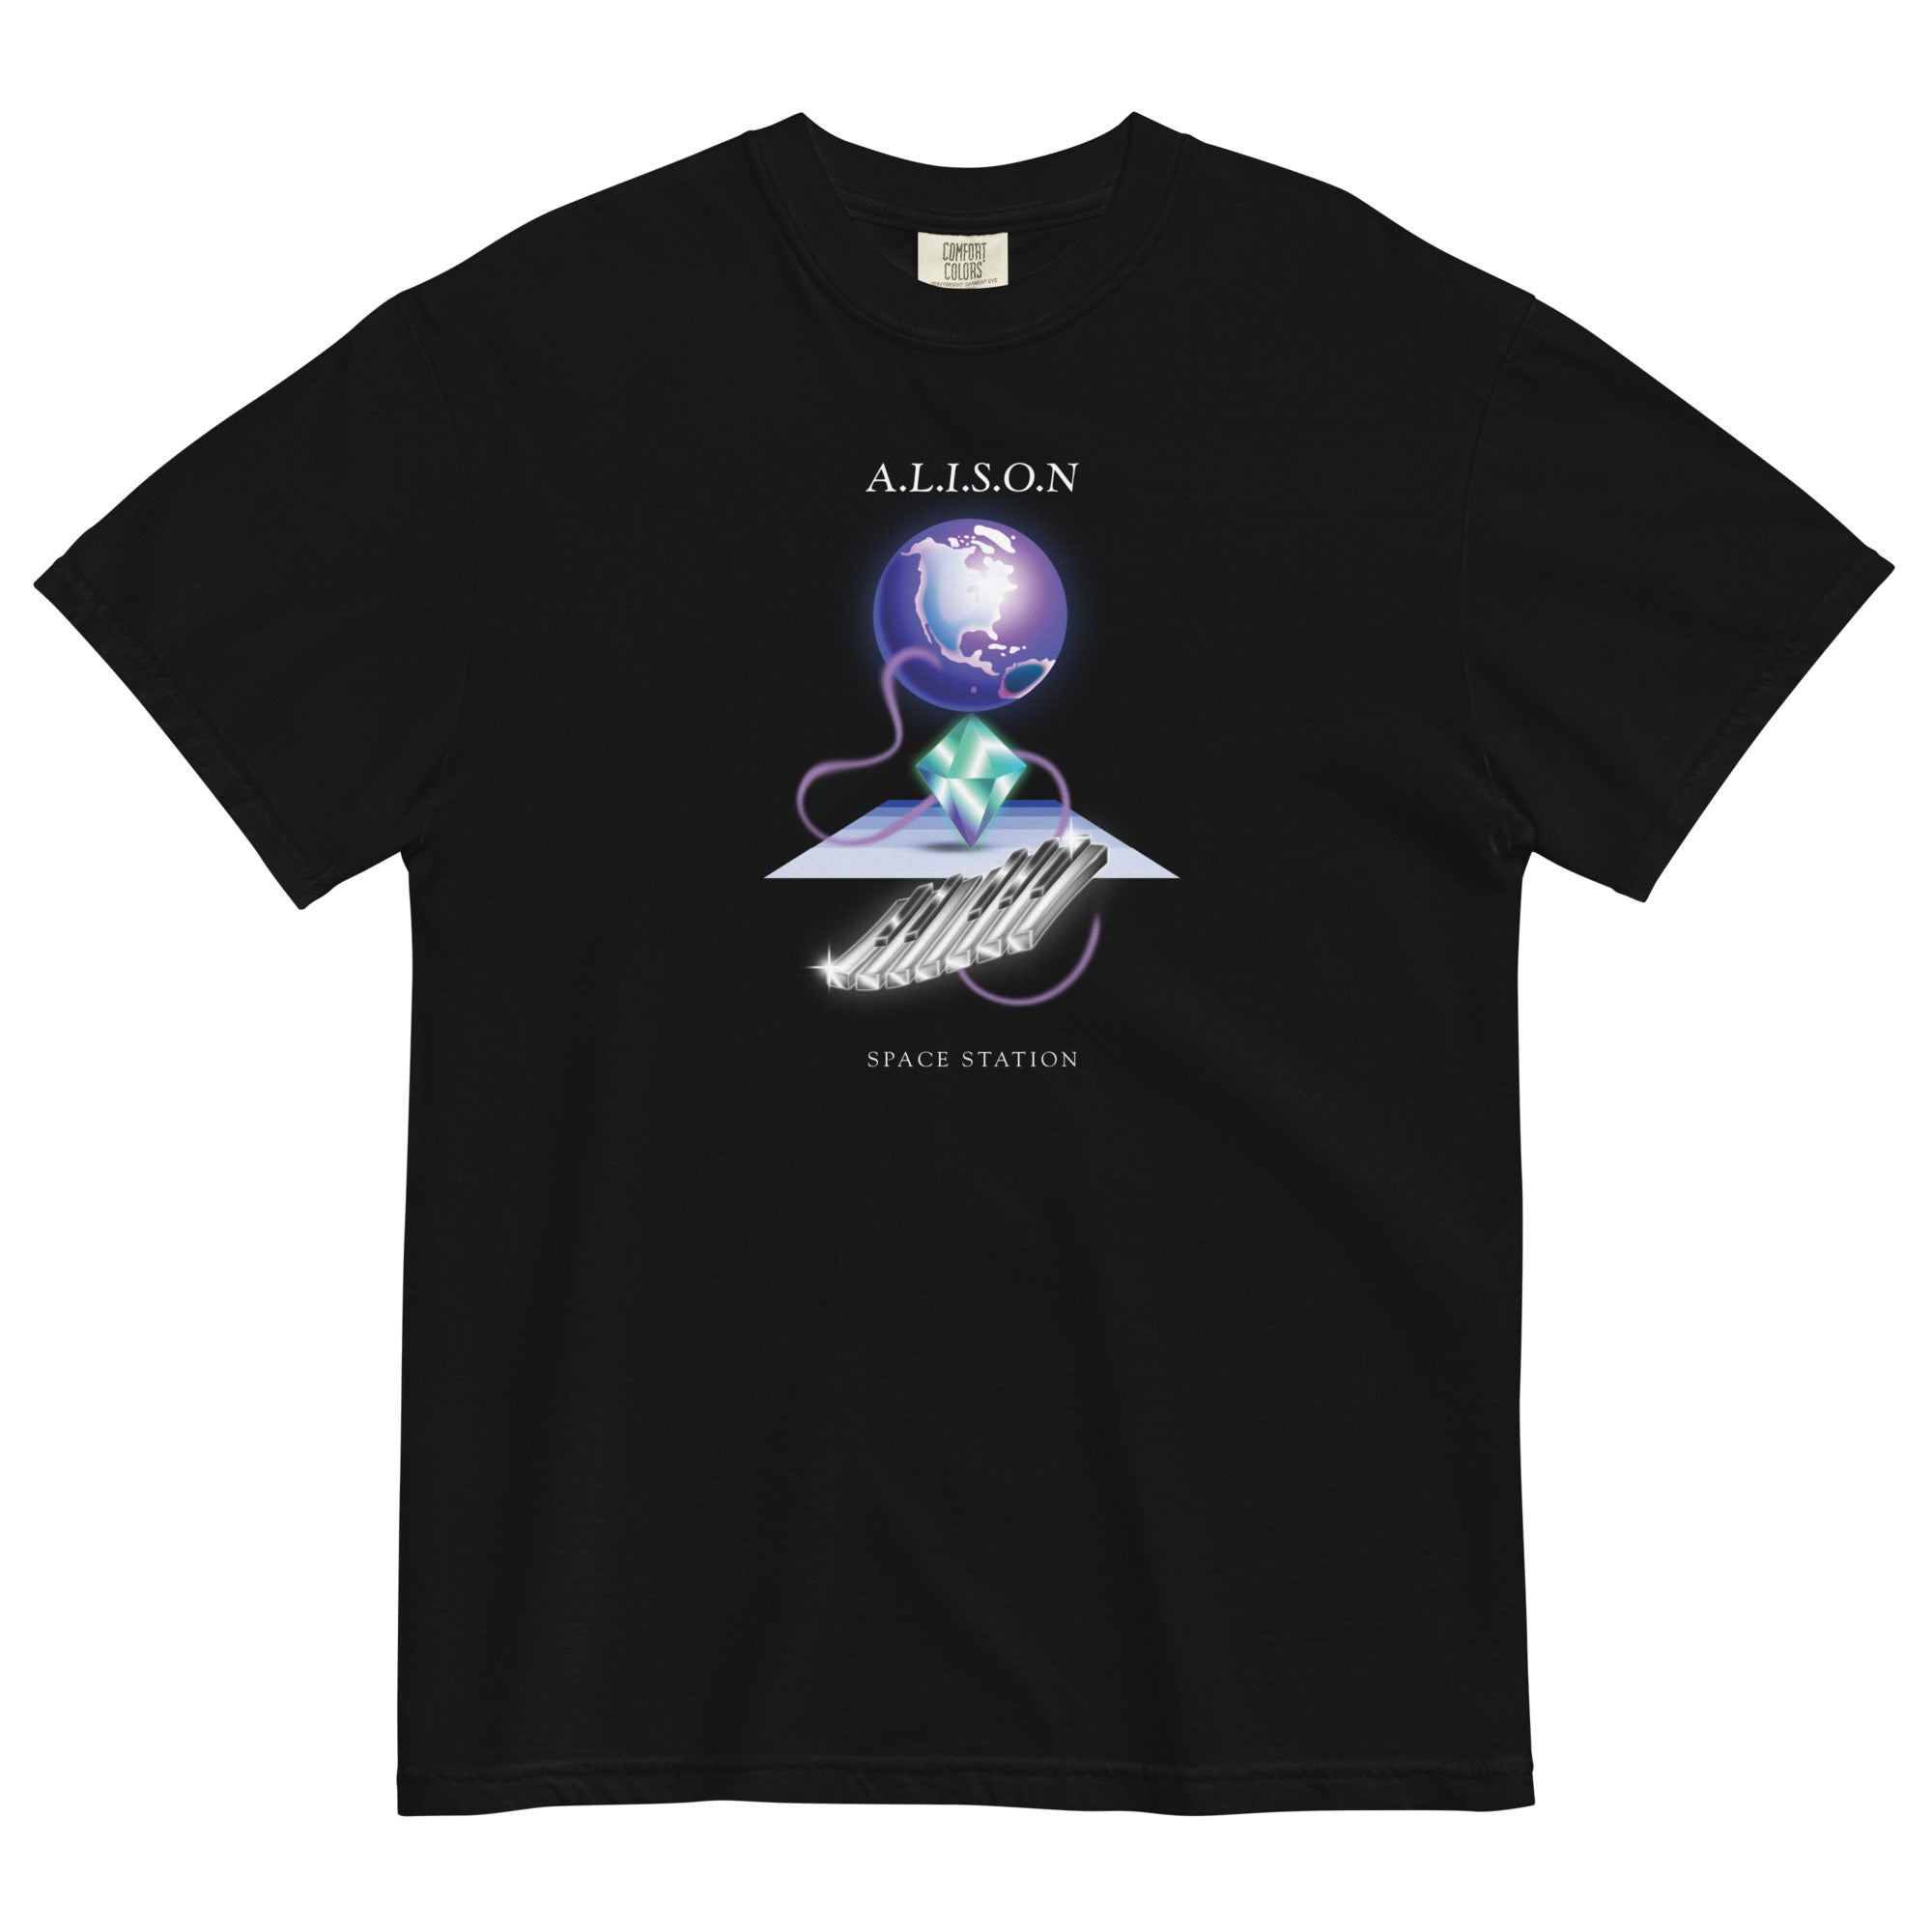 A.L.I.S.O.N Space Station T-shirt